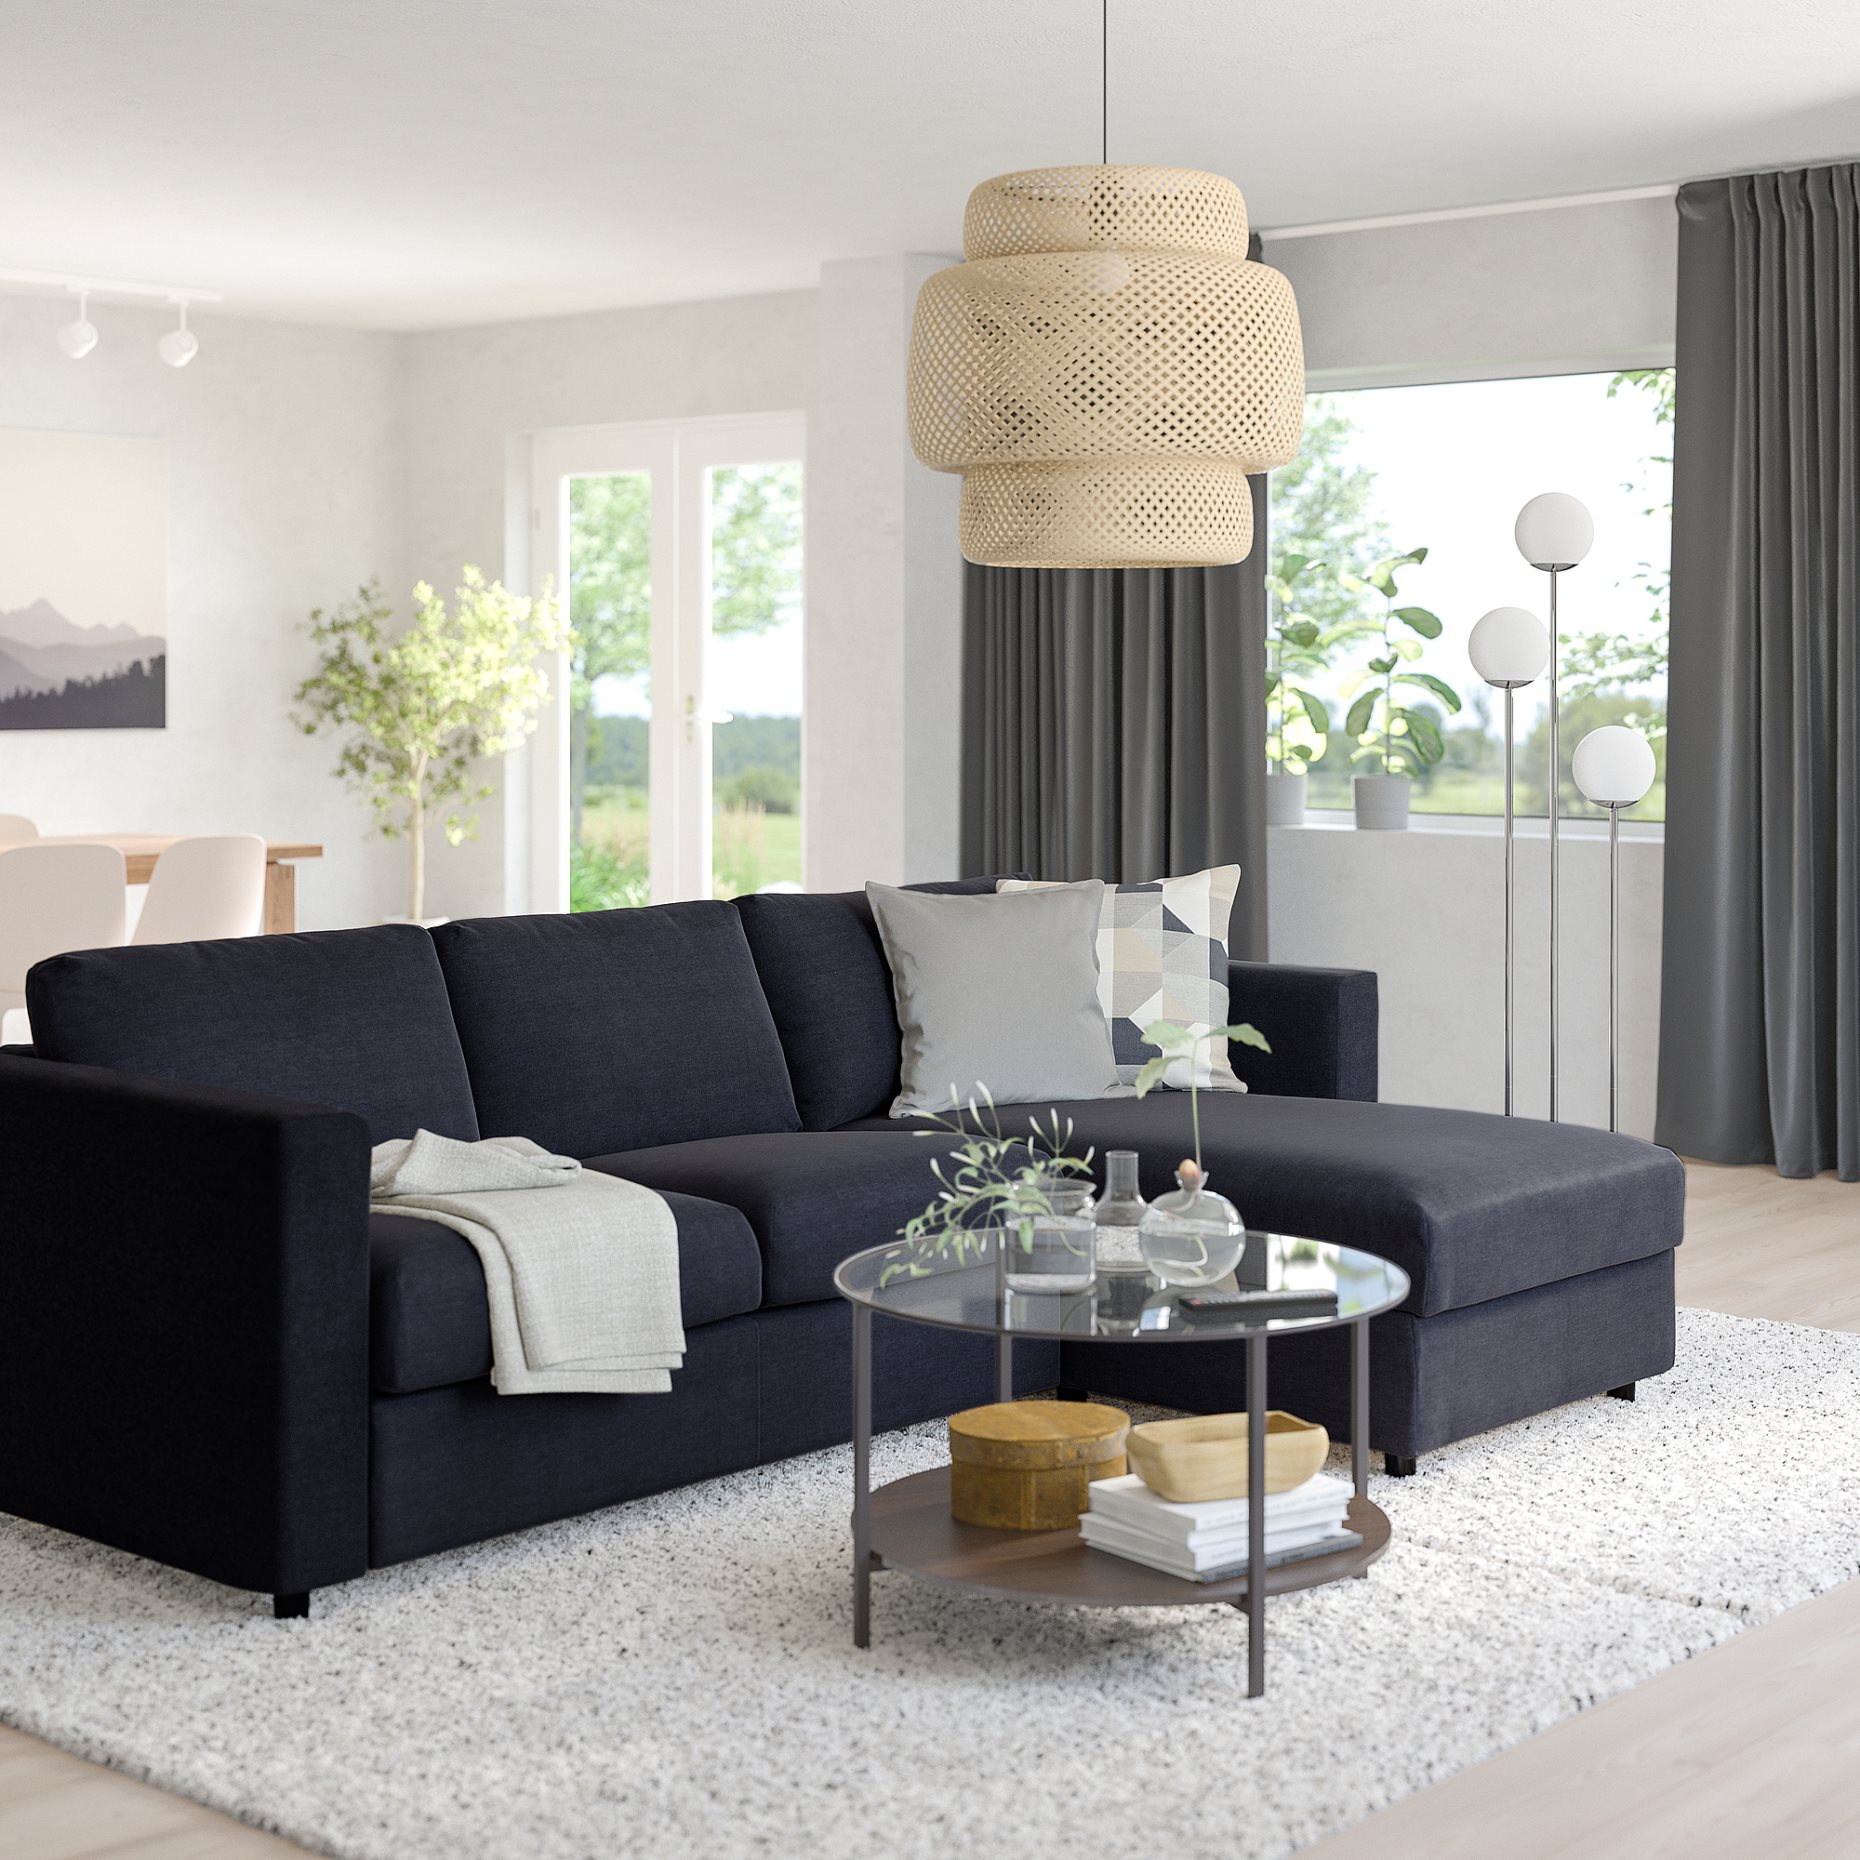 VIMLE, 3-seat sofa-bed with chaise longue, 795.372.15